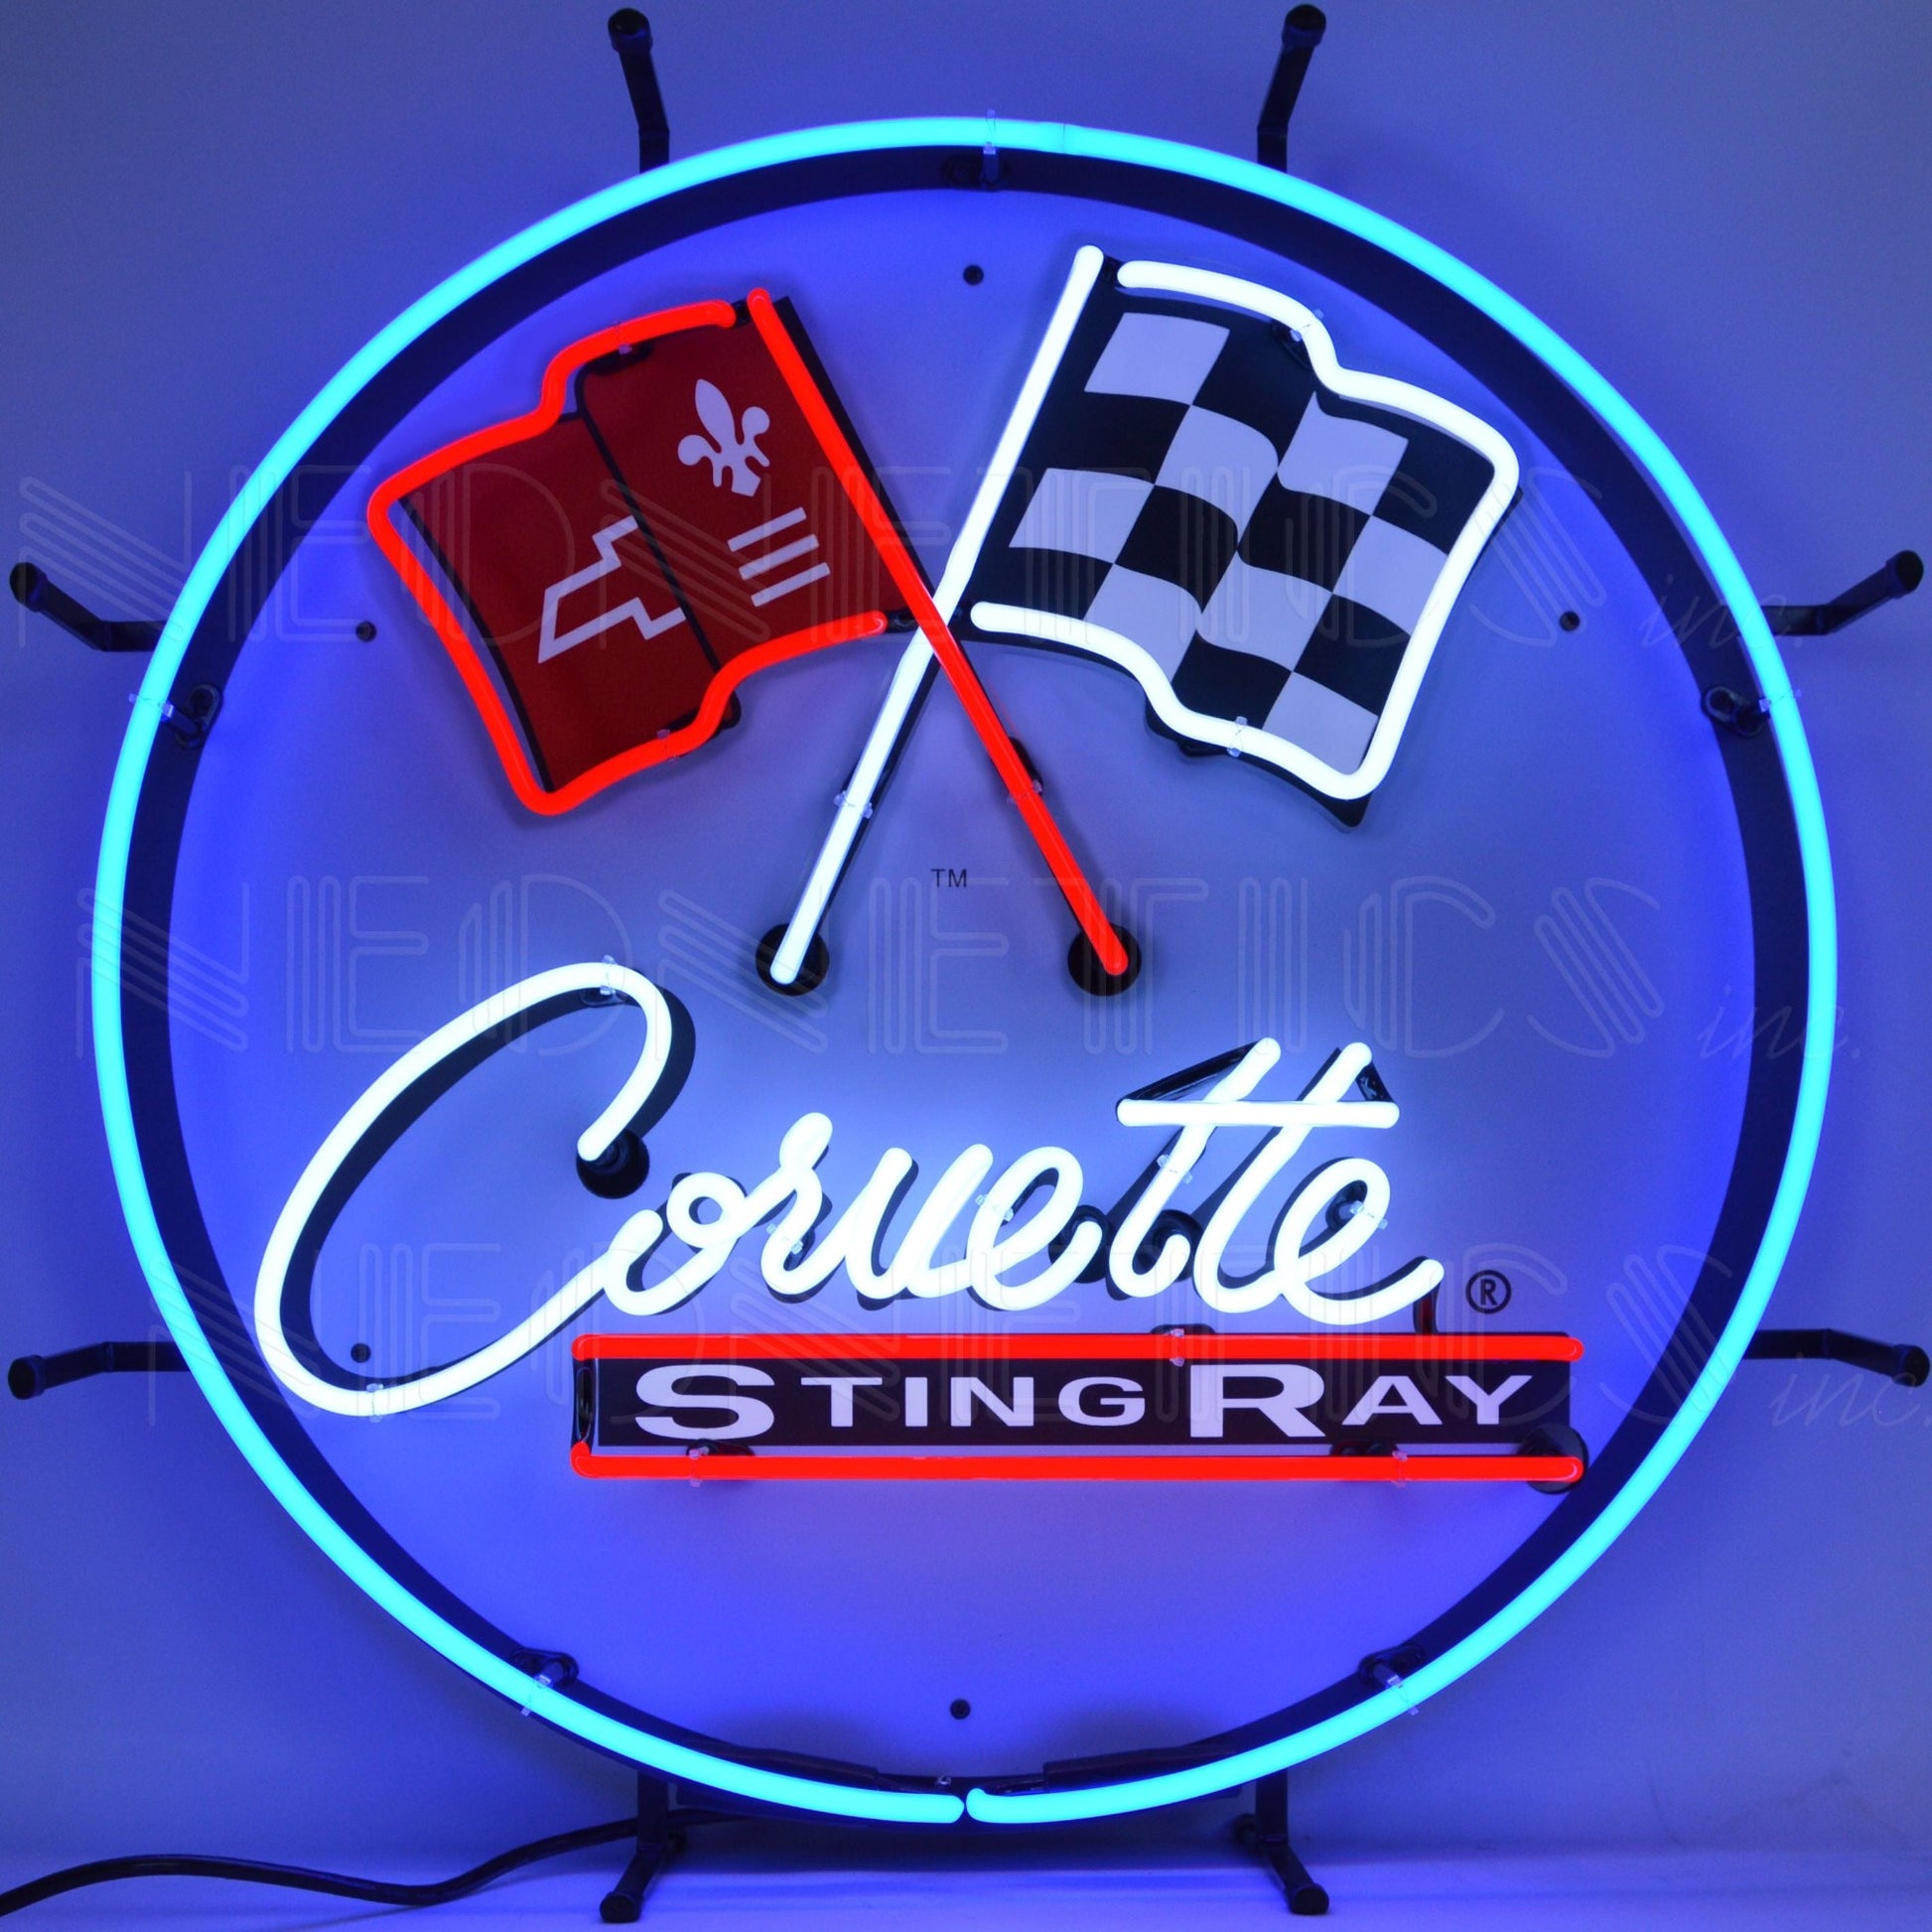 Corvette C2 Stingray Neon Sign, 24 inches wide by 24 inches high, featuring the iconic logo and Stingray emblem in neon.